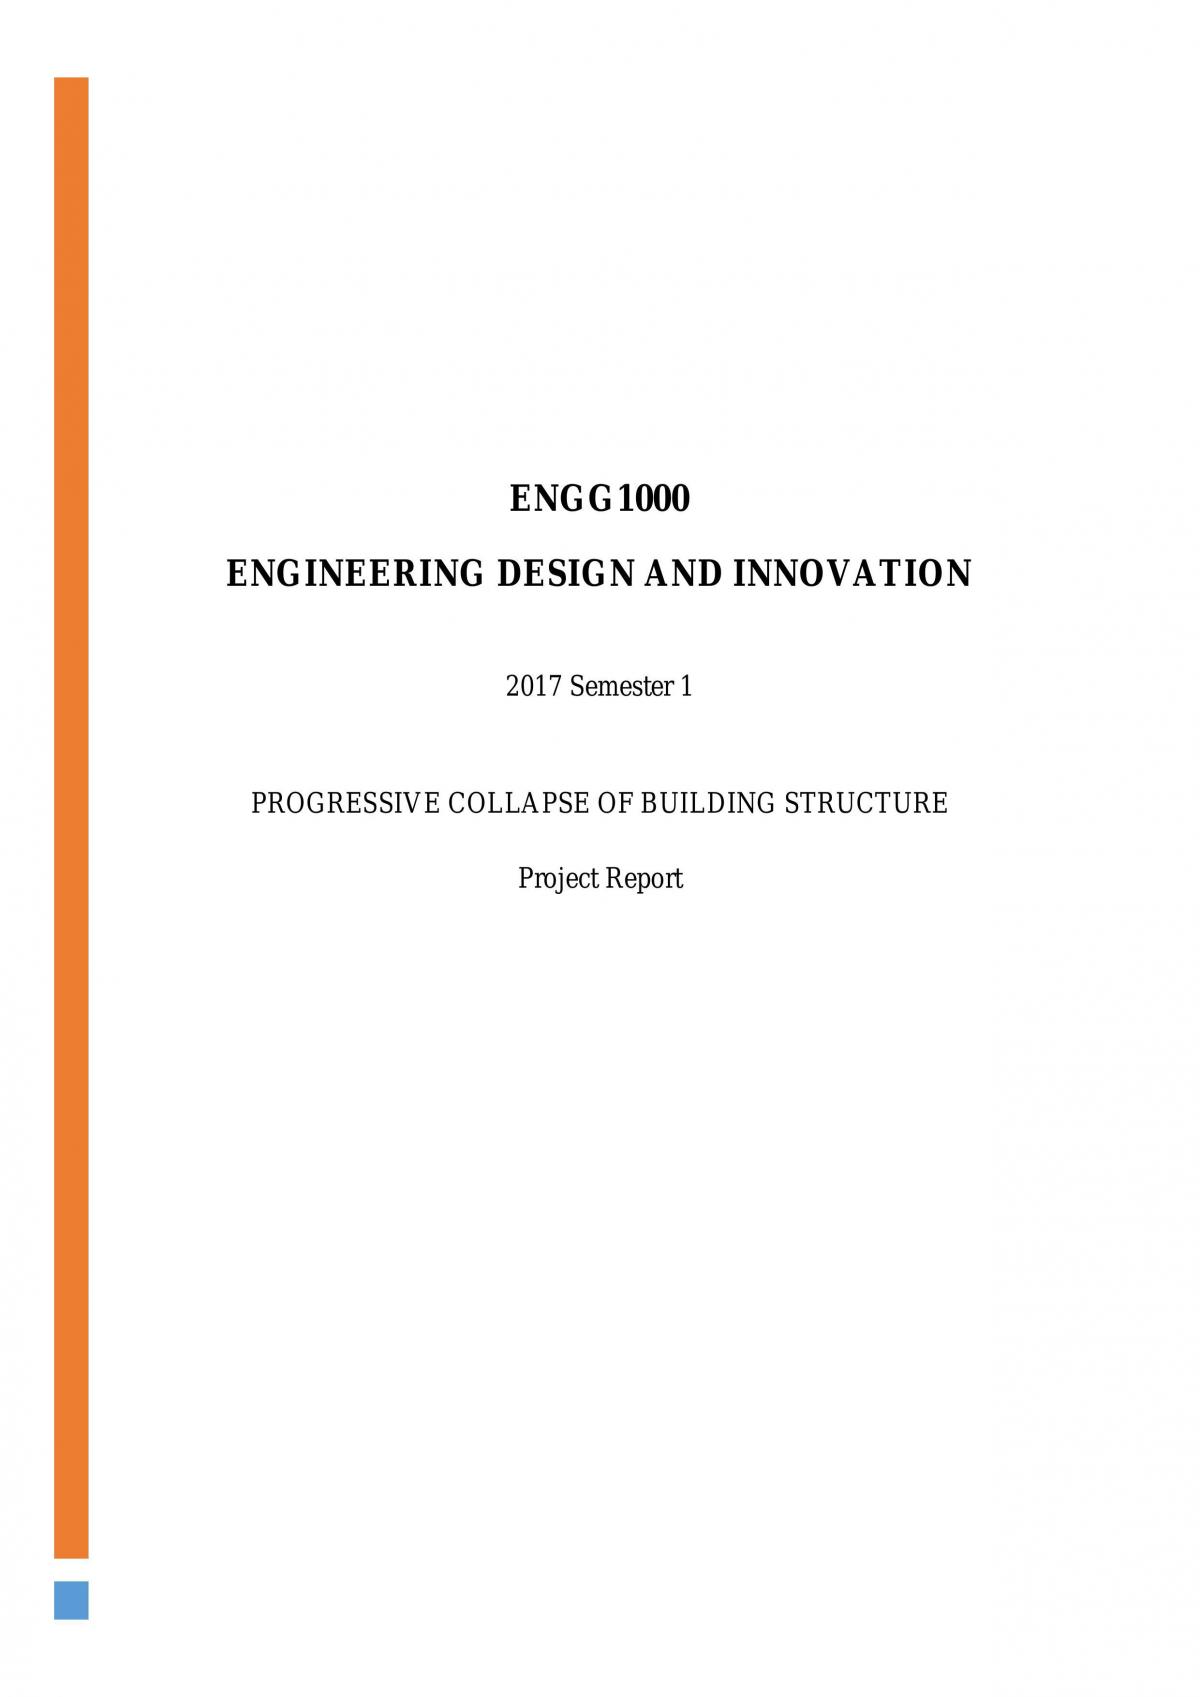 ENGG1000 Project Report - Page 1